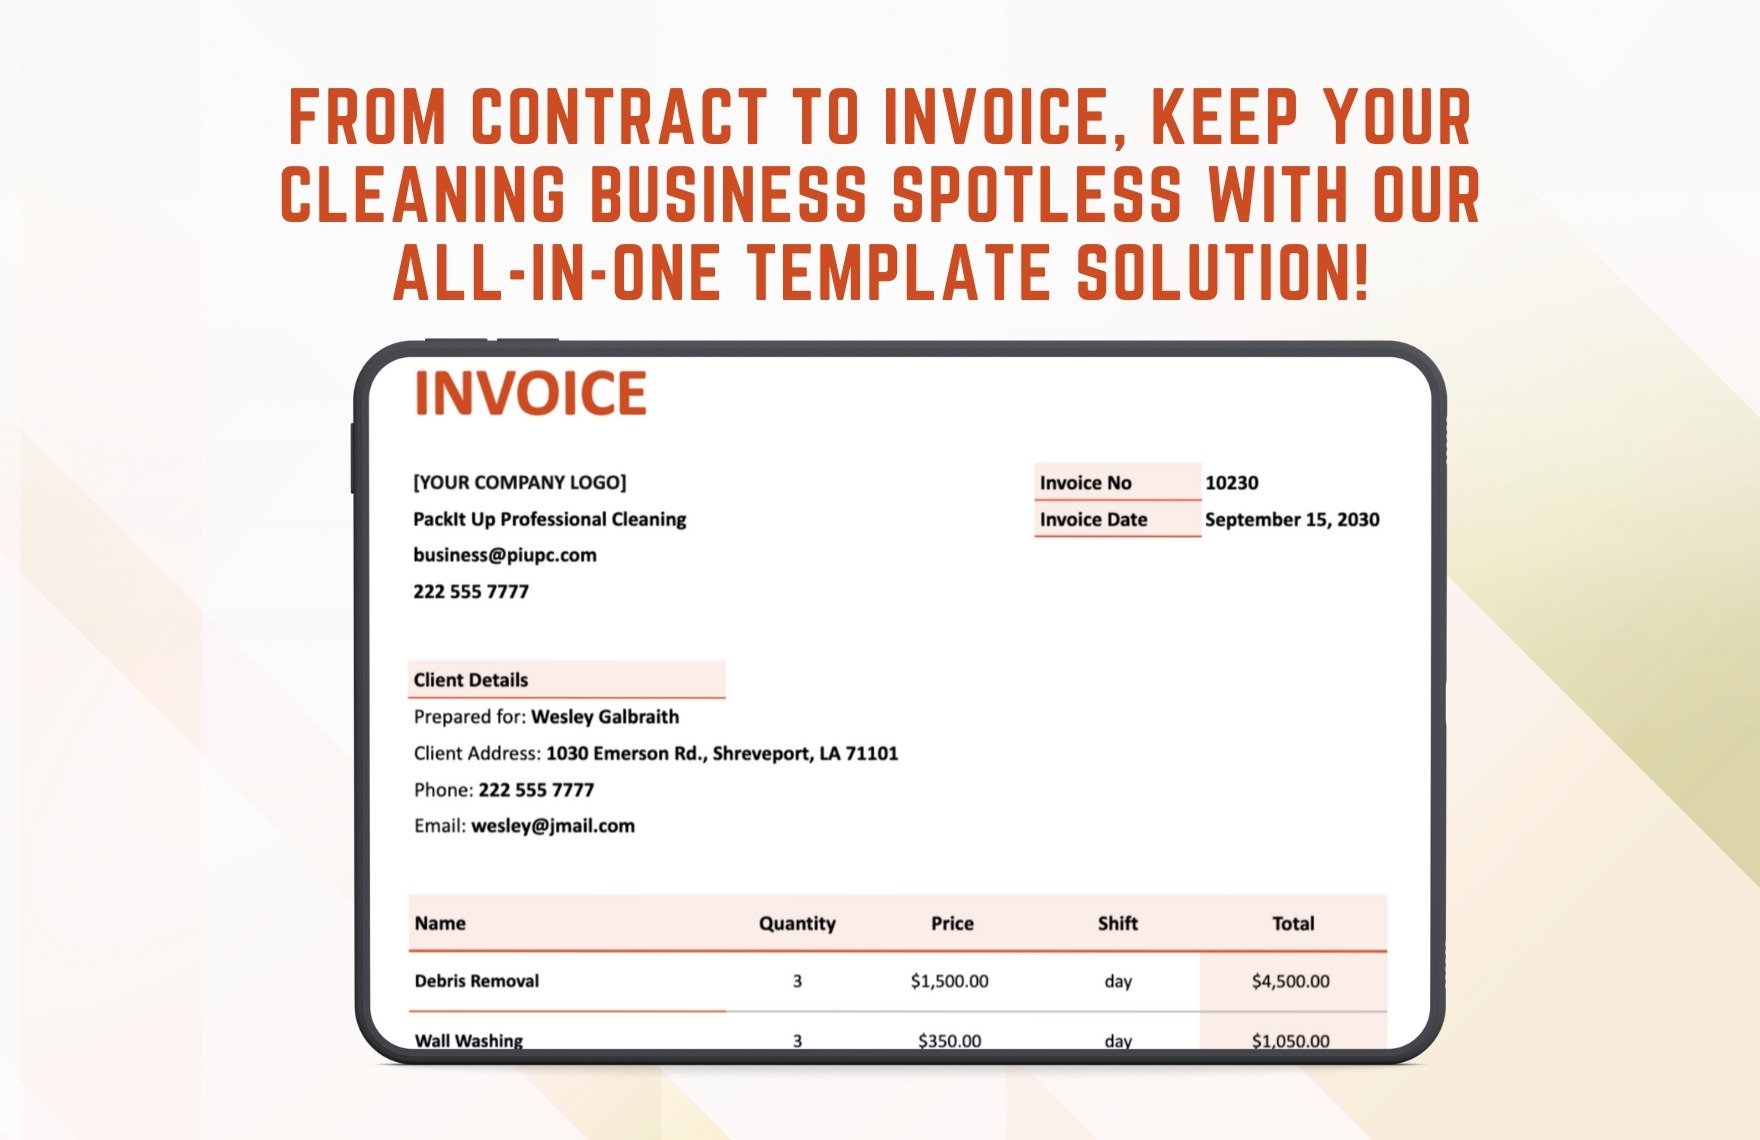 Cleaning Services Contract Agreement Invoice Template